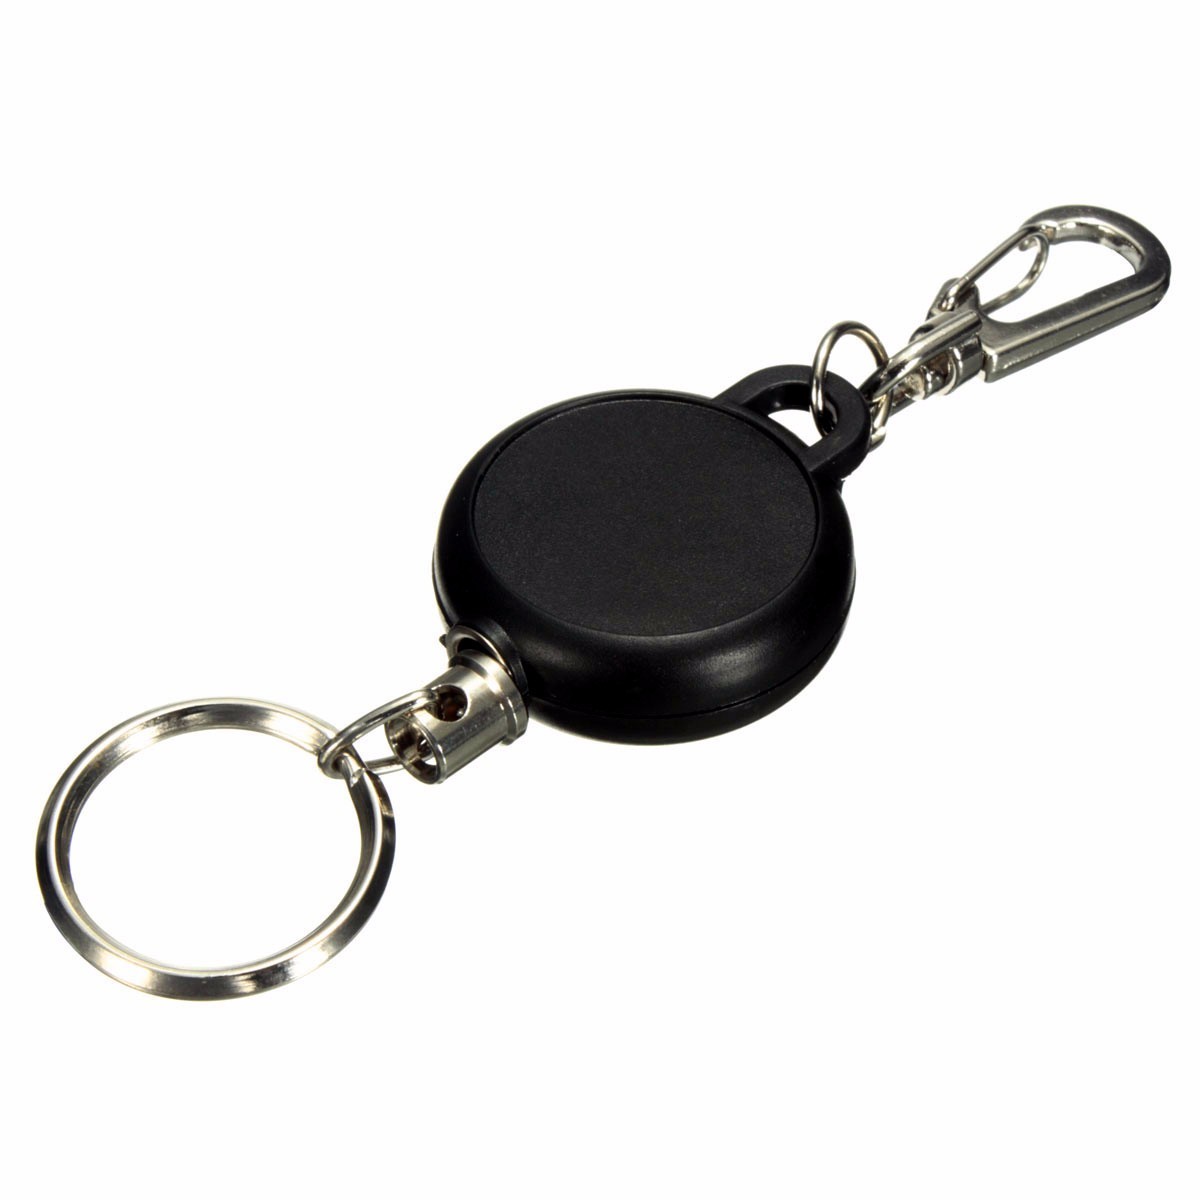 Key Chain Stainless Steel Cord Holder Keyring Reel Retractable Recoil Belt Clip Key Clip 1